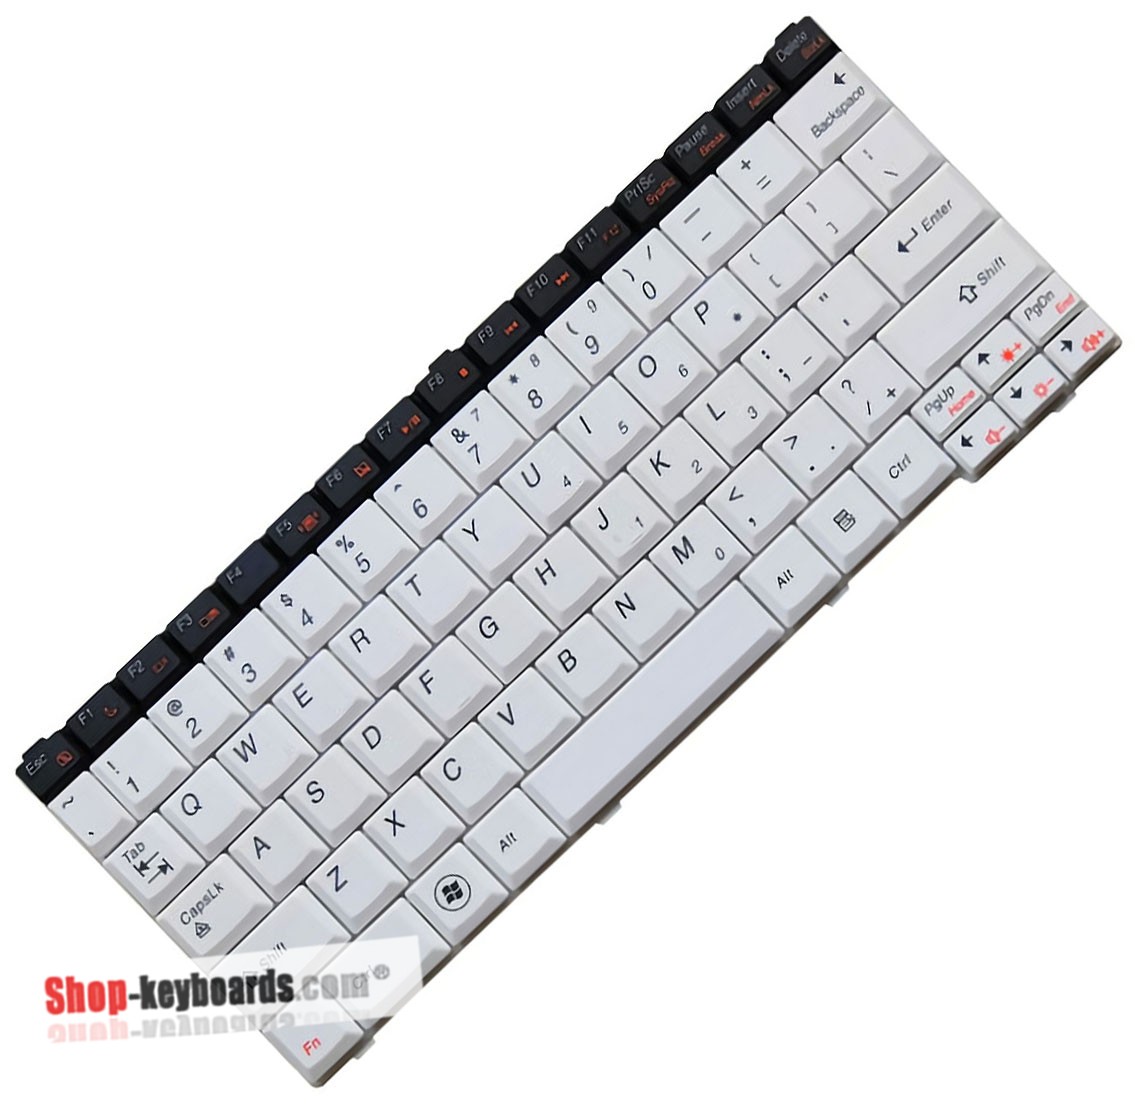 Lenovo Ideapad S10-3t Keyboard replacement